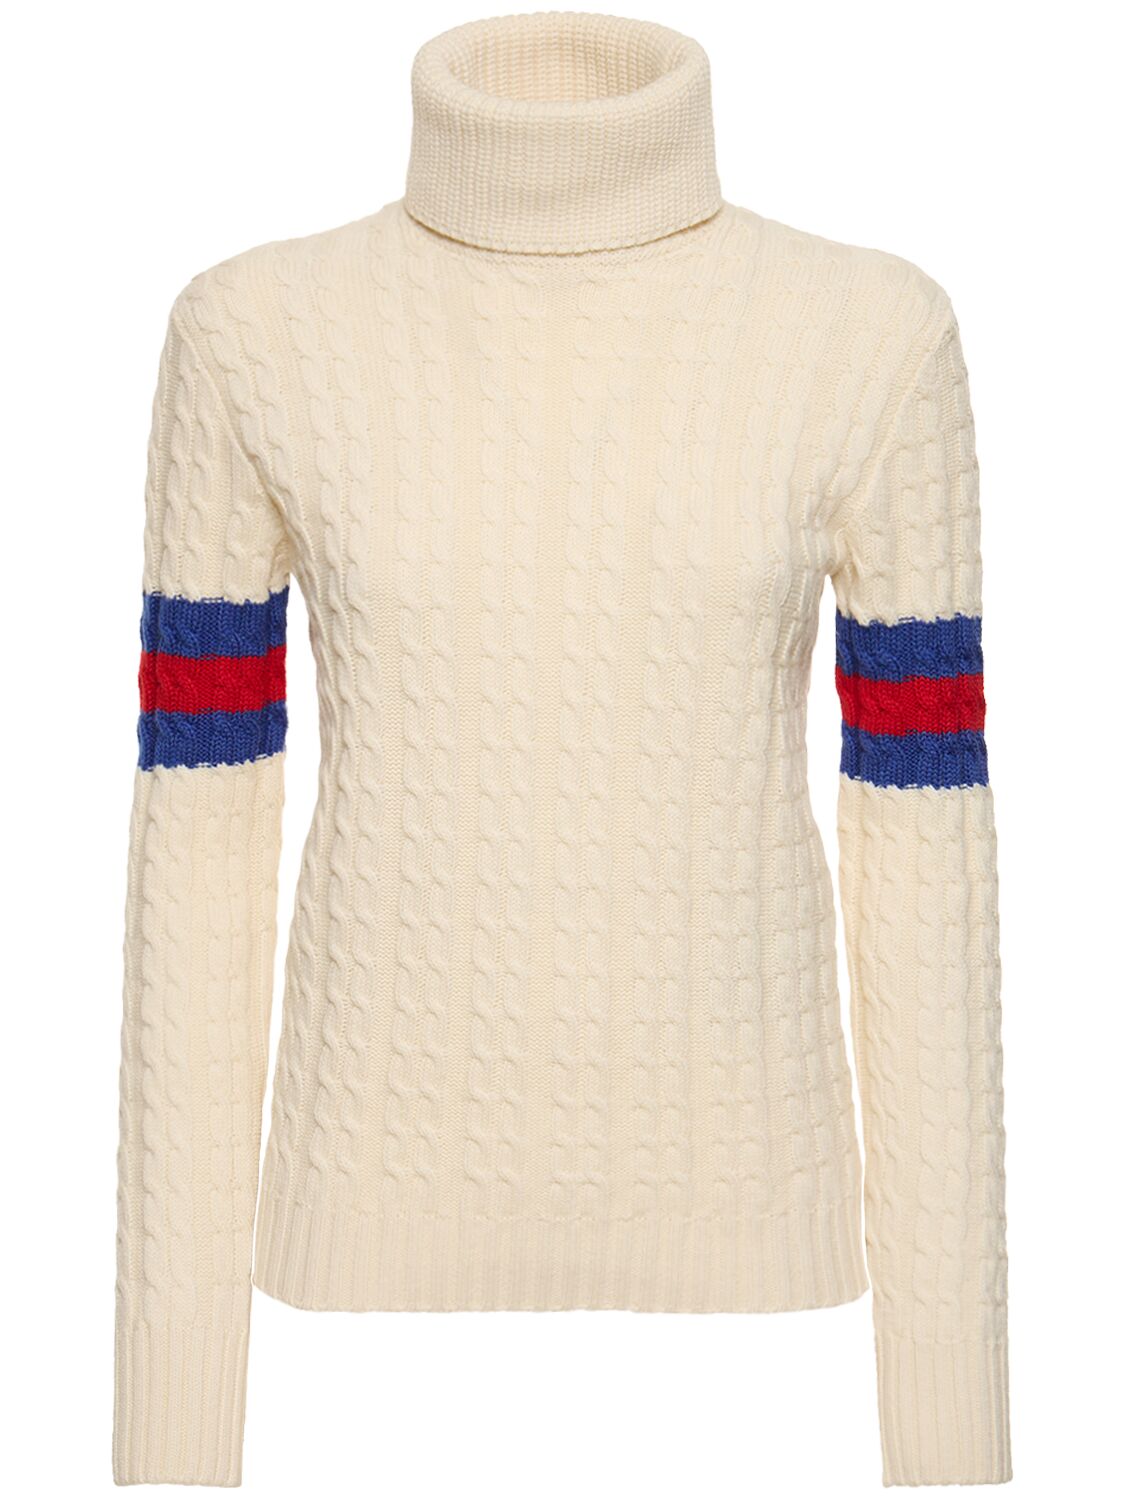 Gucci Wool & Cashmere Cable Knit Jumper In Ivory,blue,red